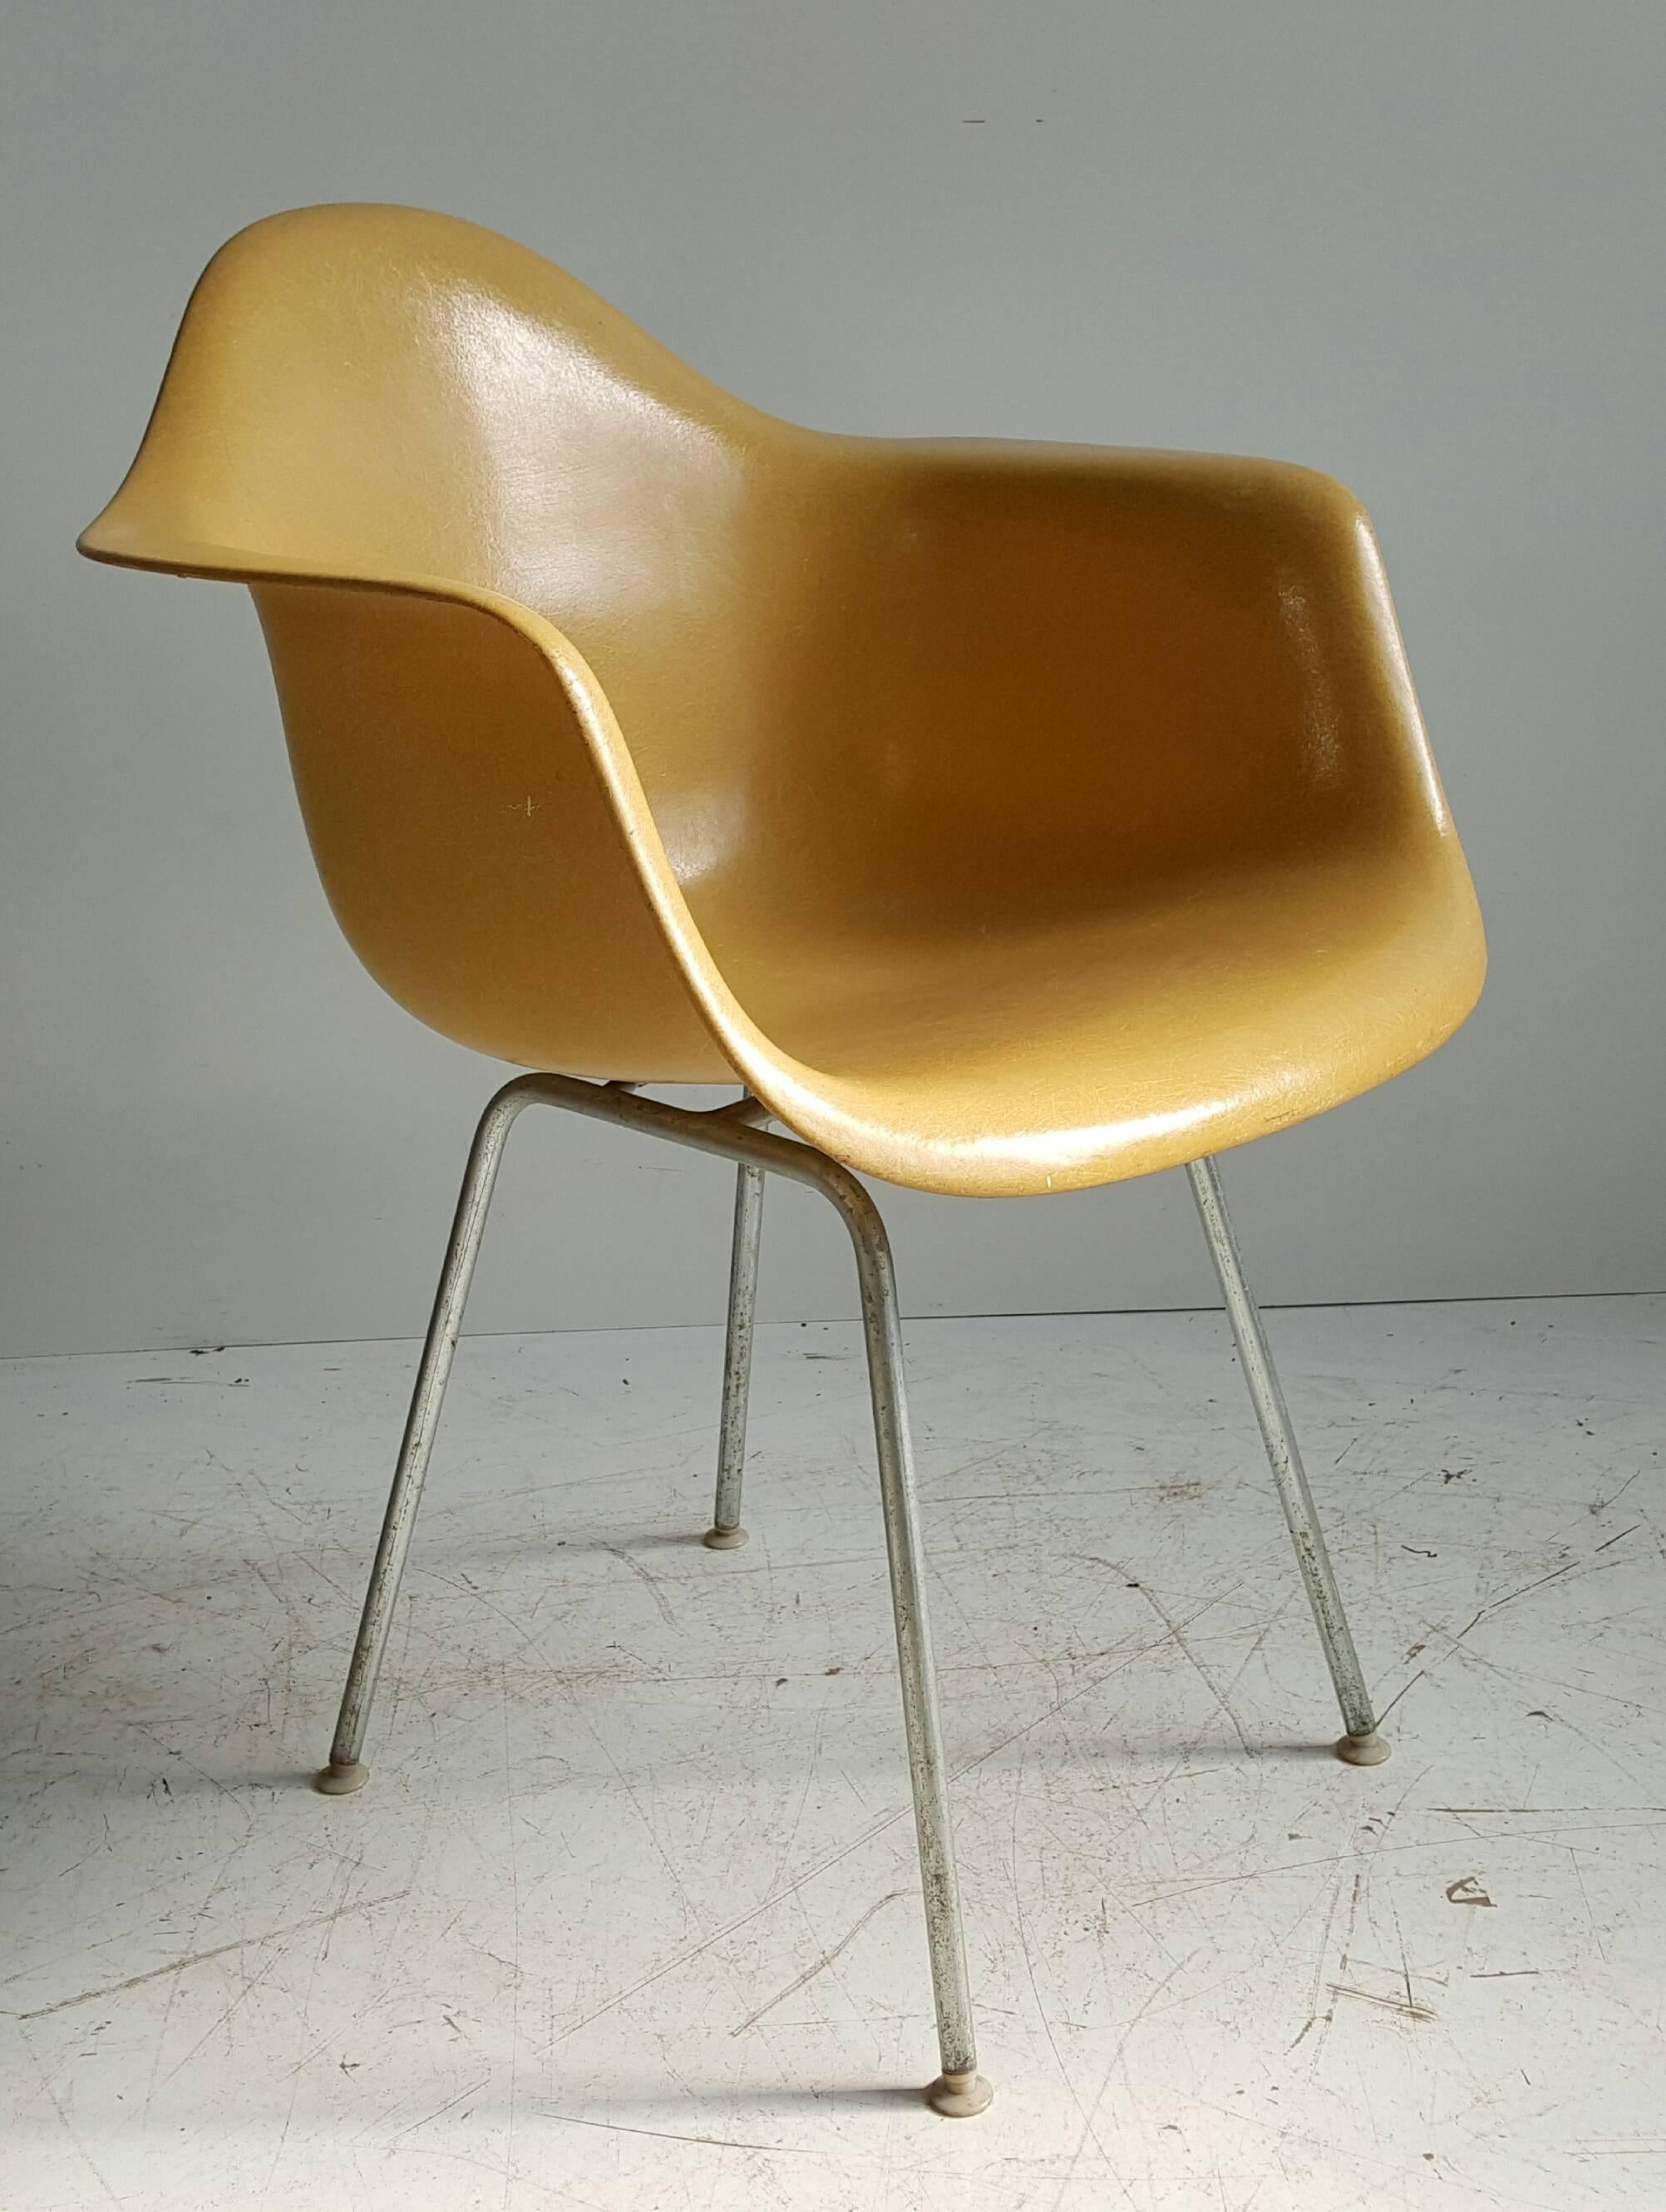 Charles and Ray Eames arm shell chair. Great example, circa 1970s manufactured by Herman Miller, Classic modernist 'H